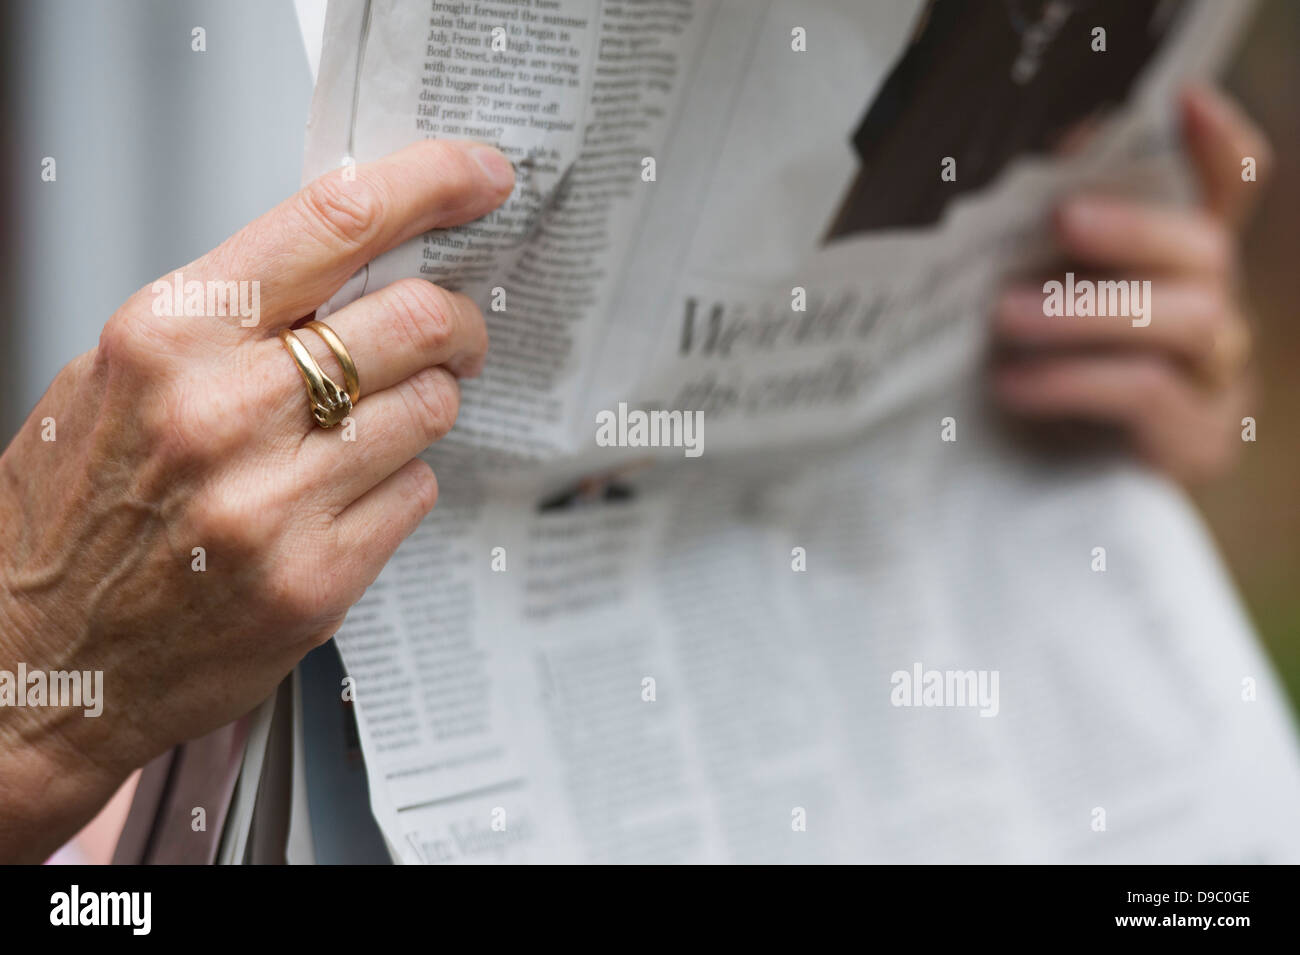 Senior womans hands holding newspaper. Selective focus. Stock Photo